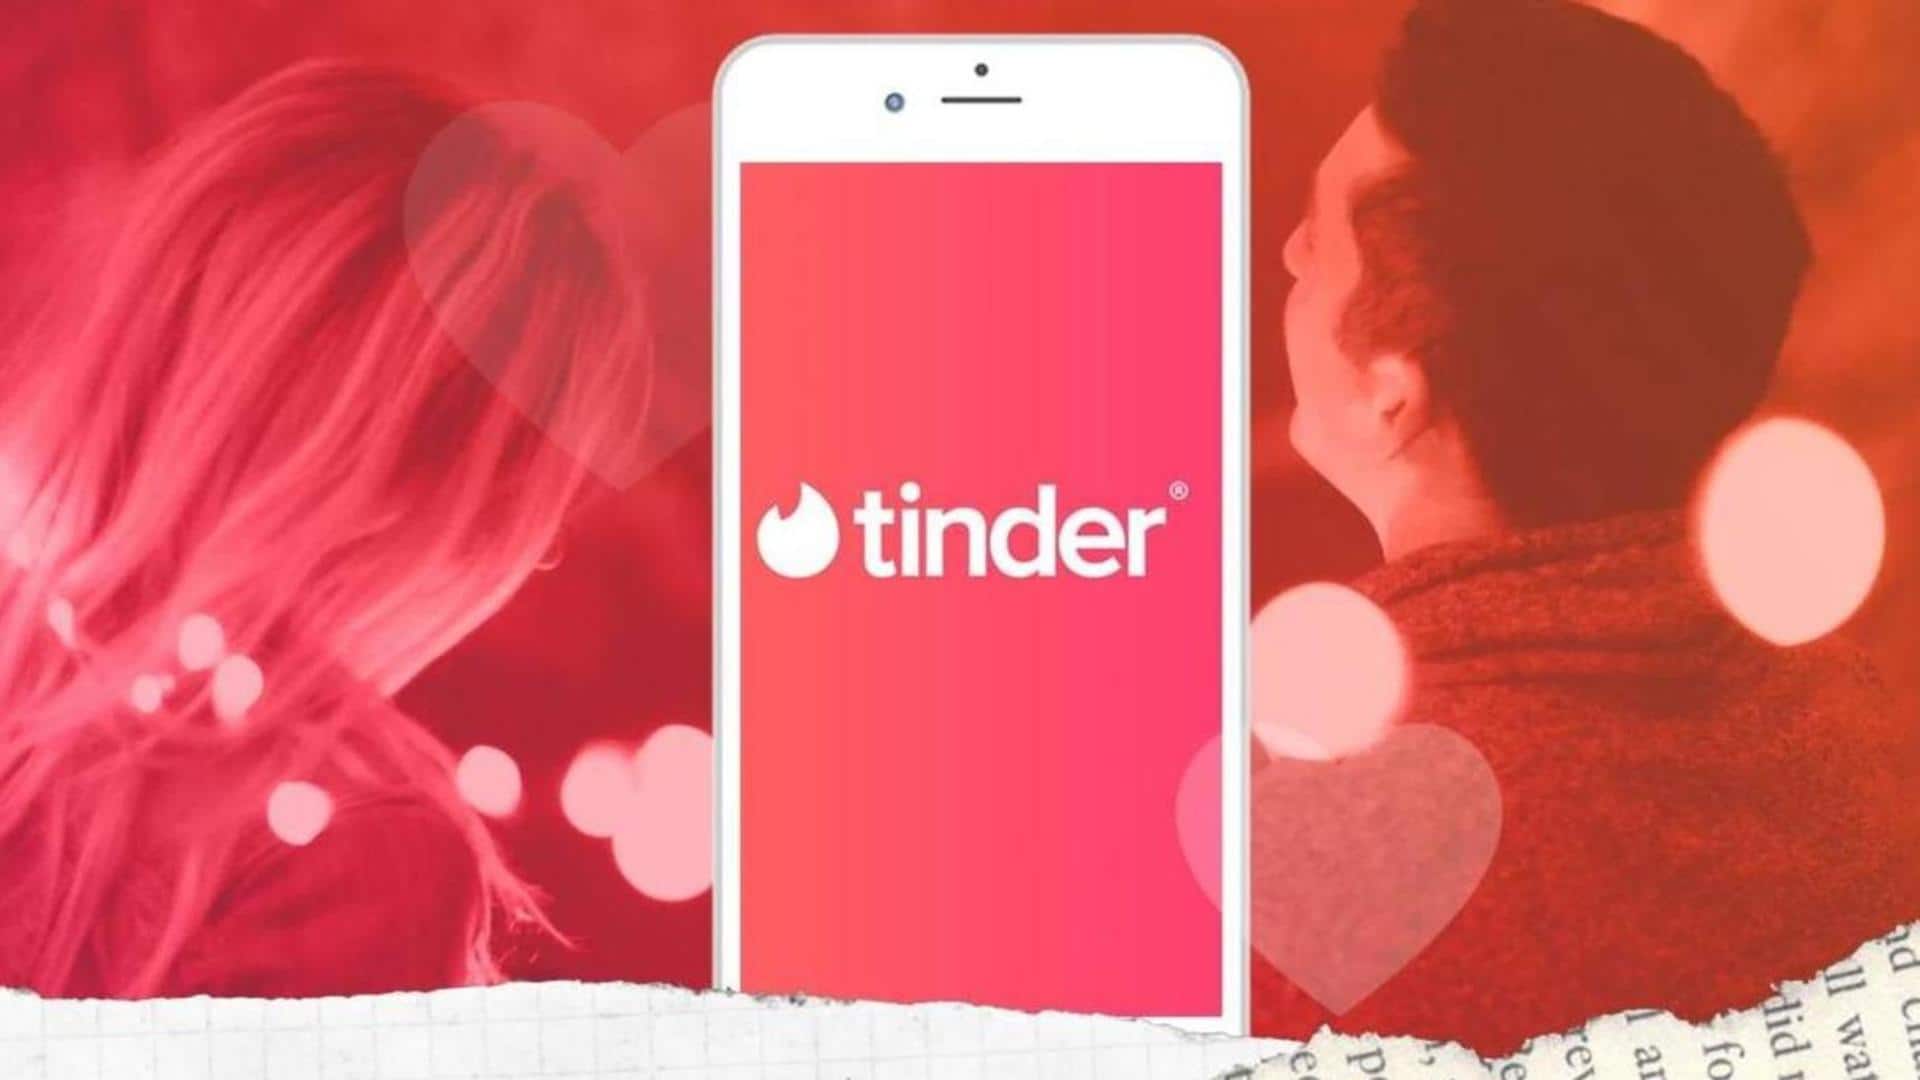 Tinder launches slew of safety features on Safer Internet Day